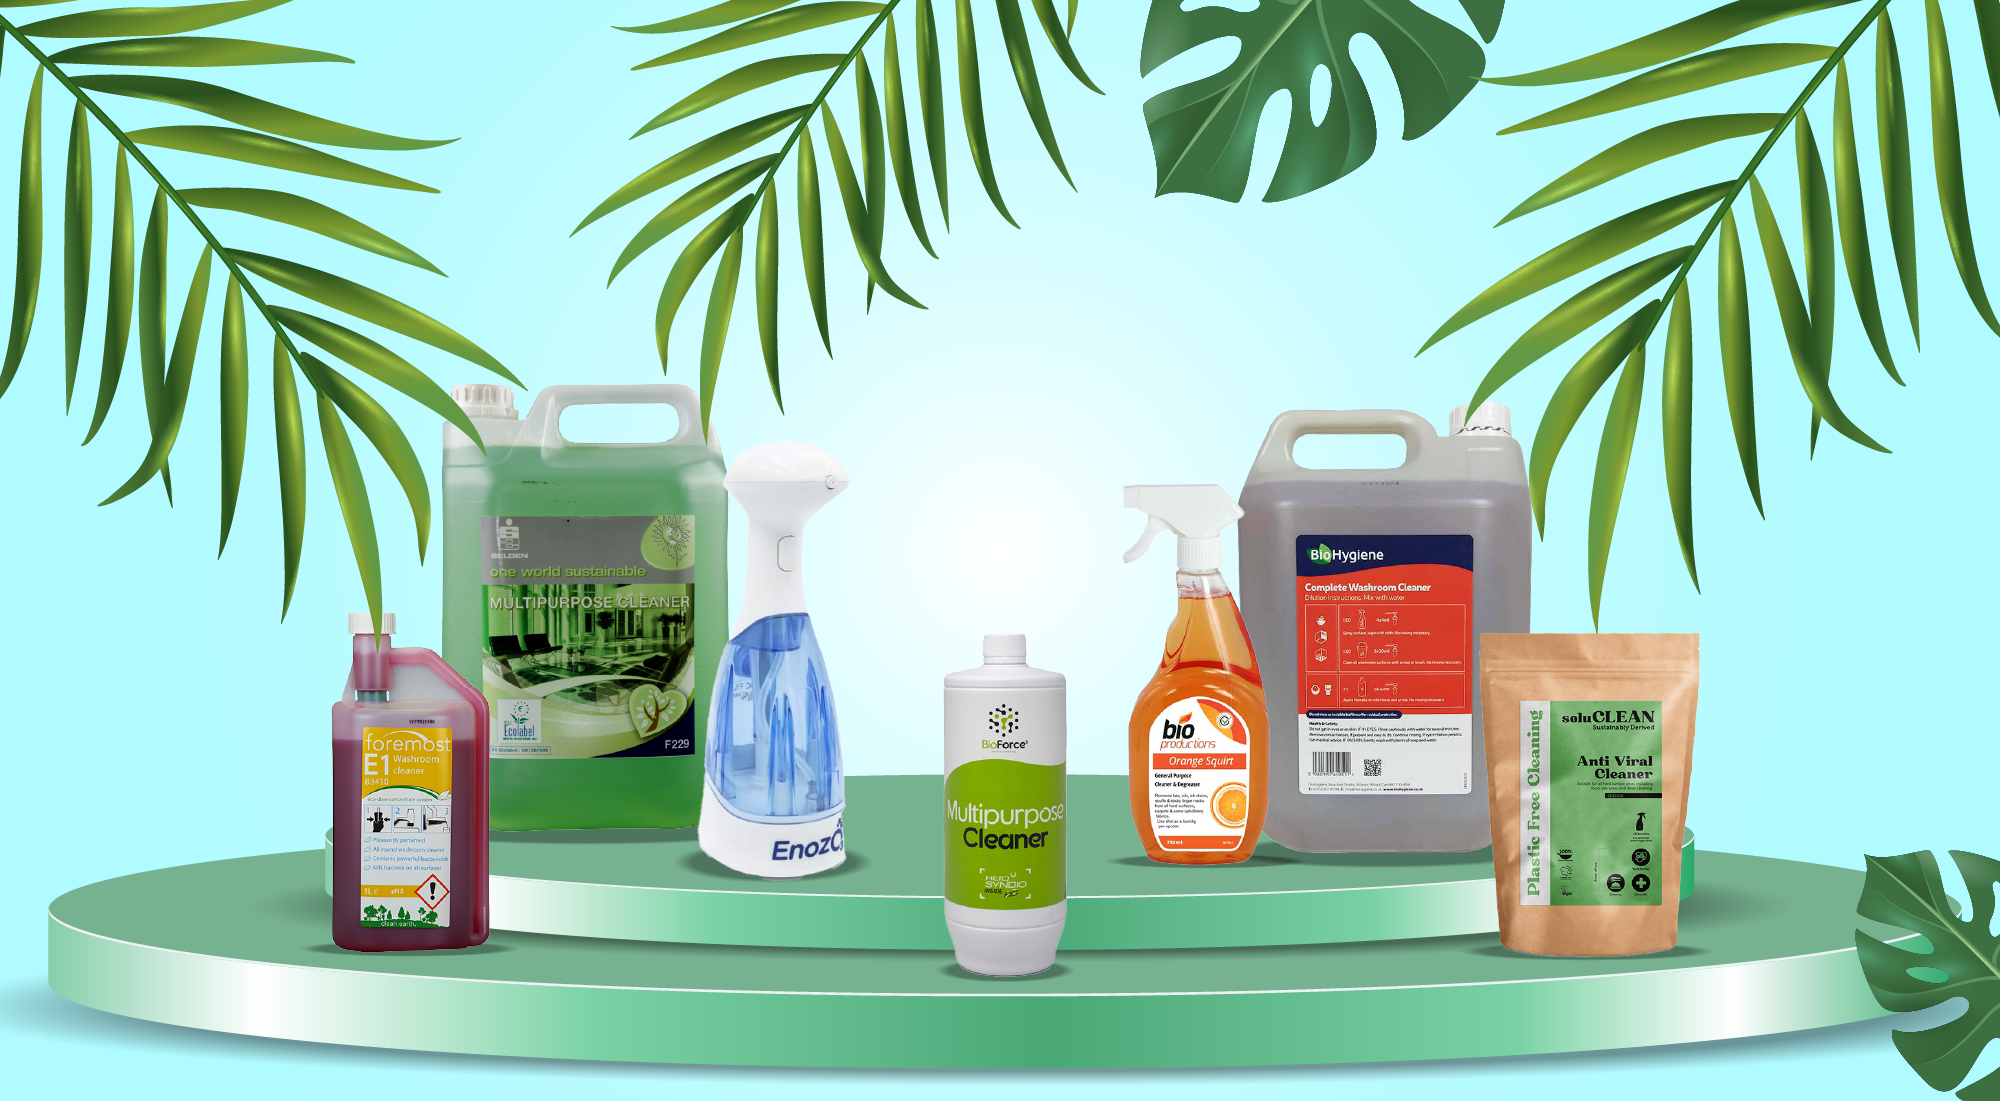 What eco-friendly cleaning chemicals are best?